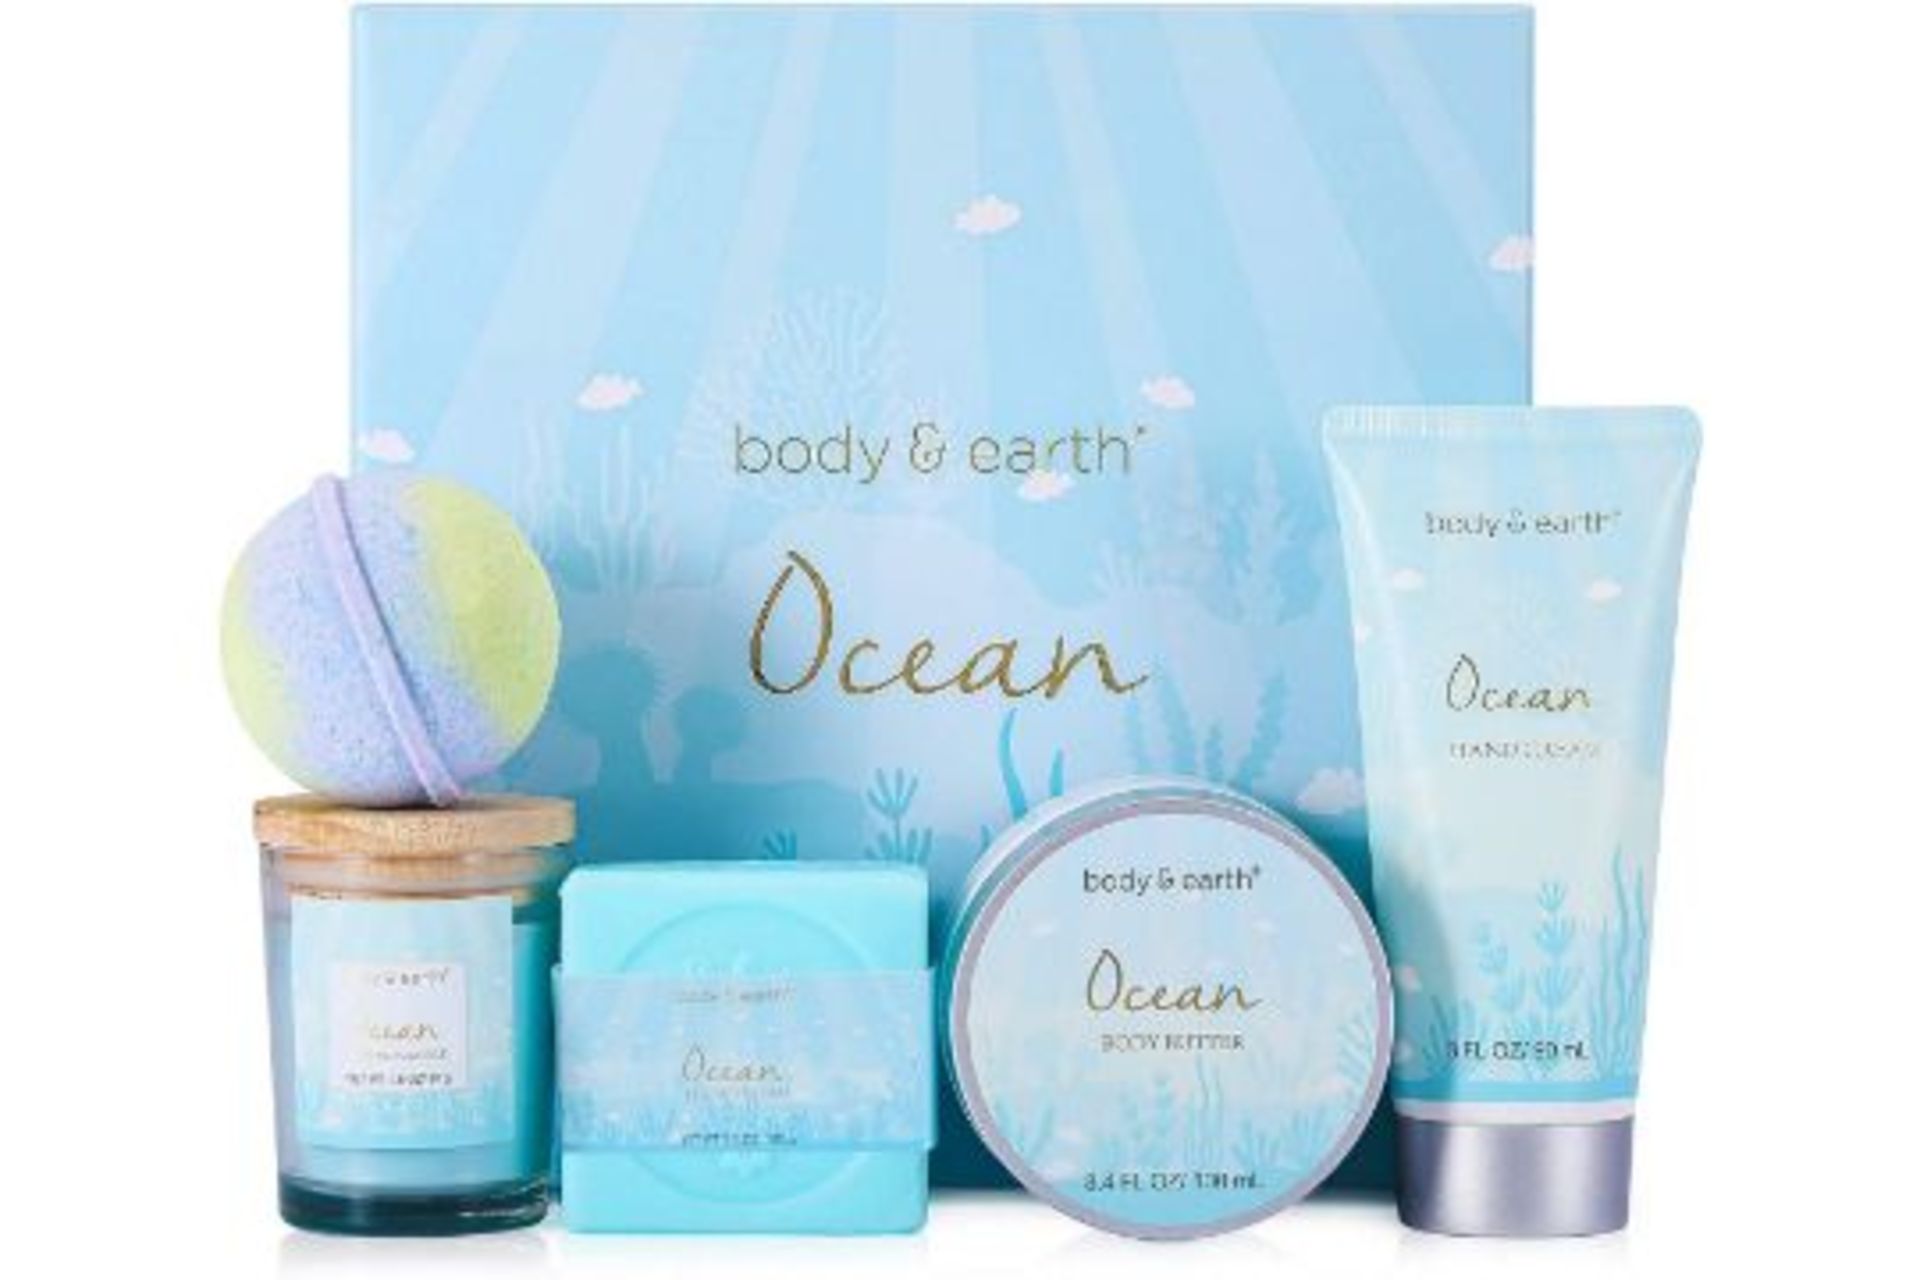 PALLET TO CONTAIN 120 x NEW BOXED BODY & EARTH OCEAN 5 PIECE GIFT SETS. EACH SET INCLUDES: BATH